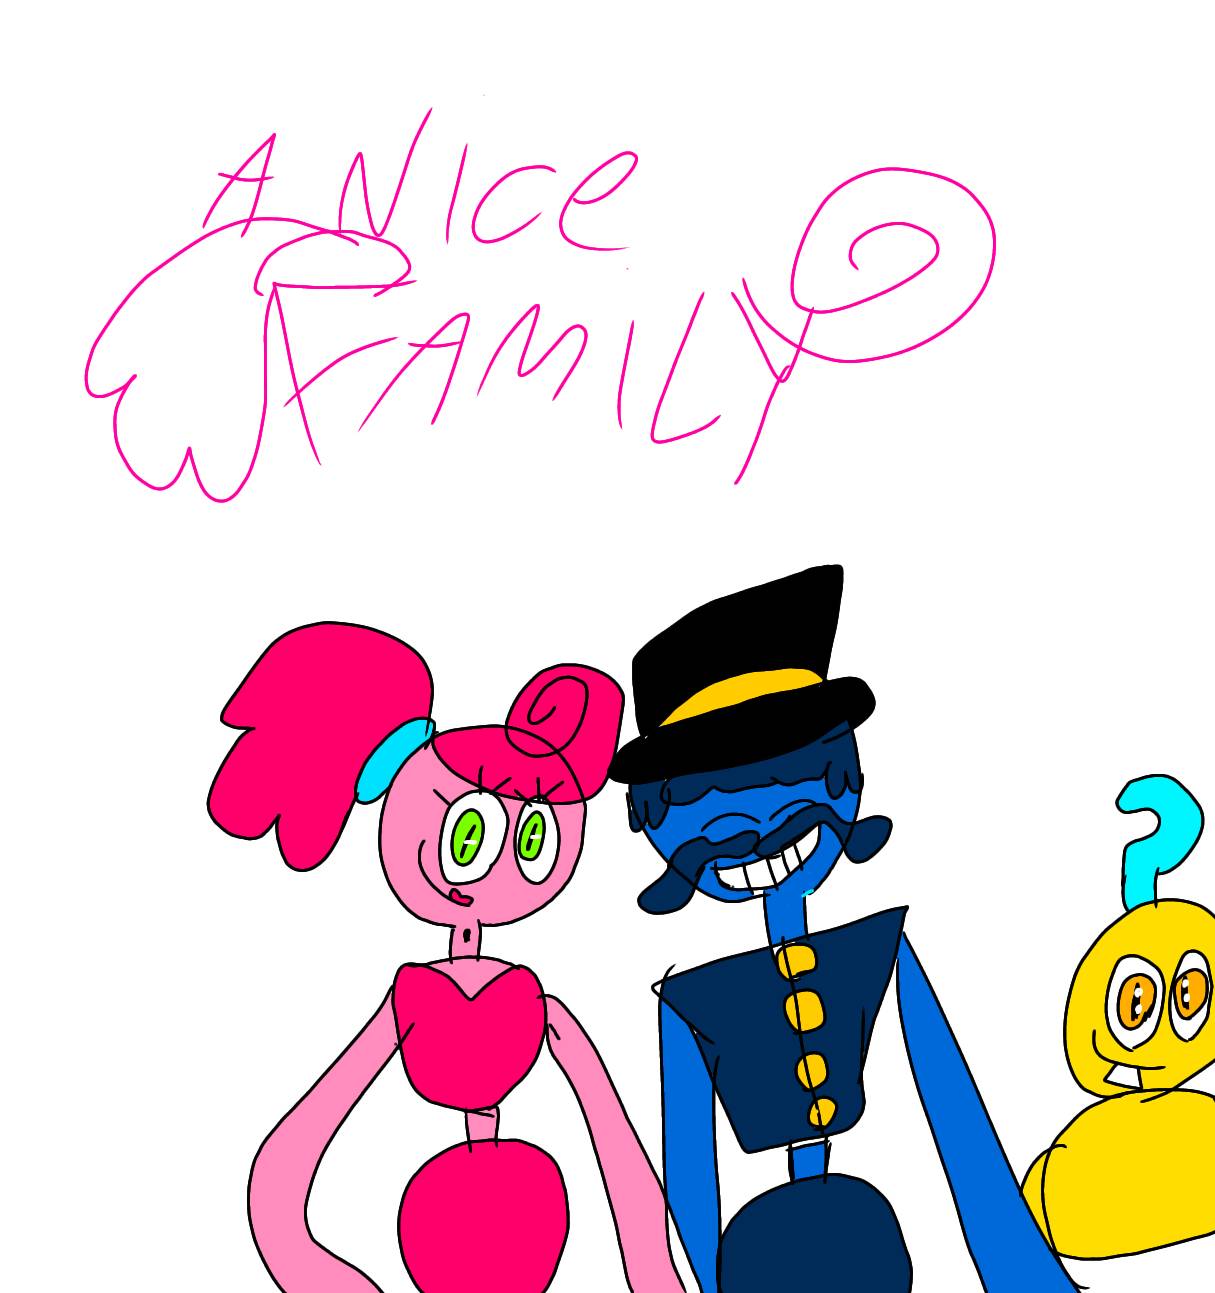 Mommy long legs and family by BriannaSheppard on DeviantArt